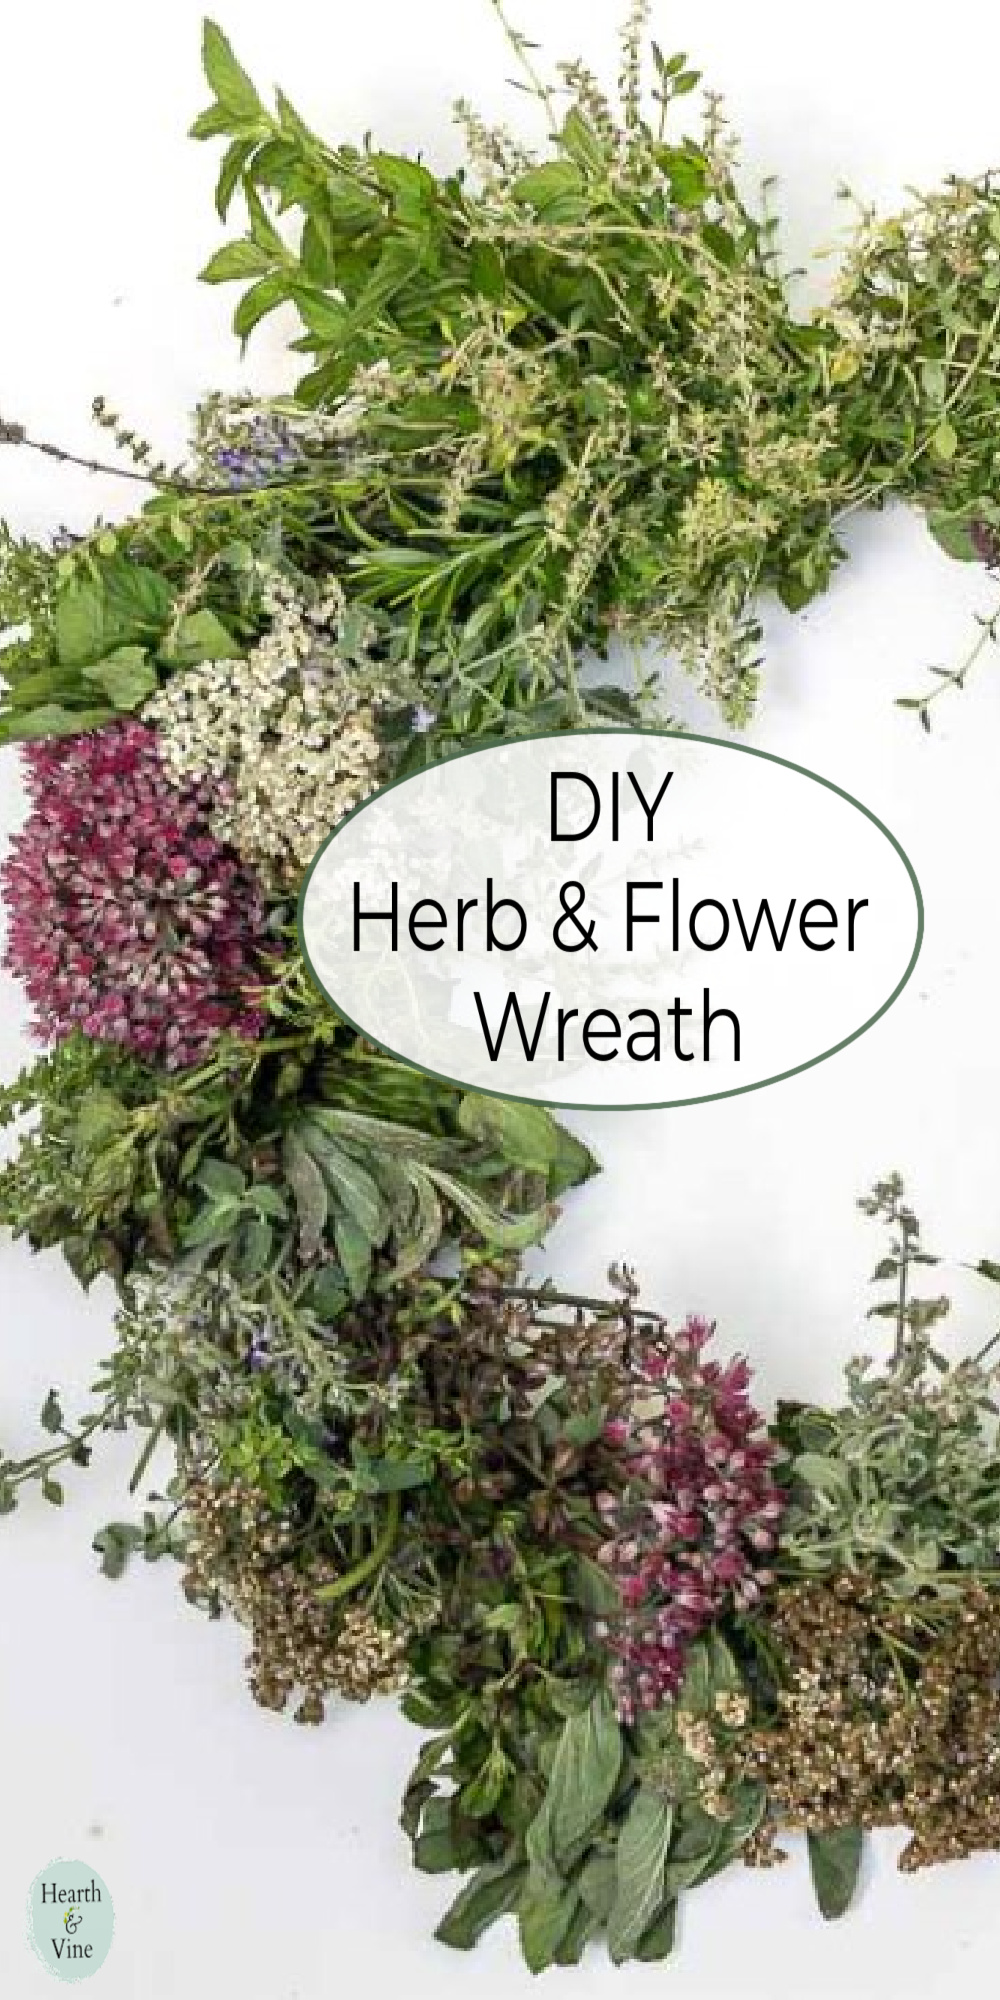 Partial view of a fresh herb and flower wreath.